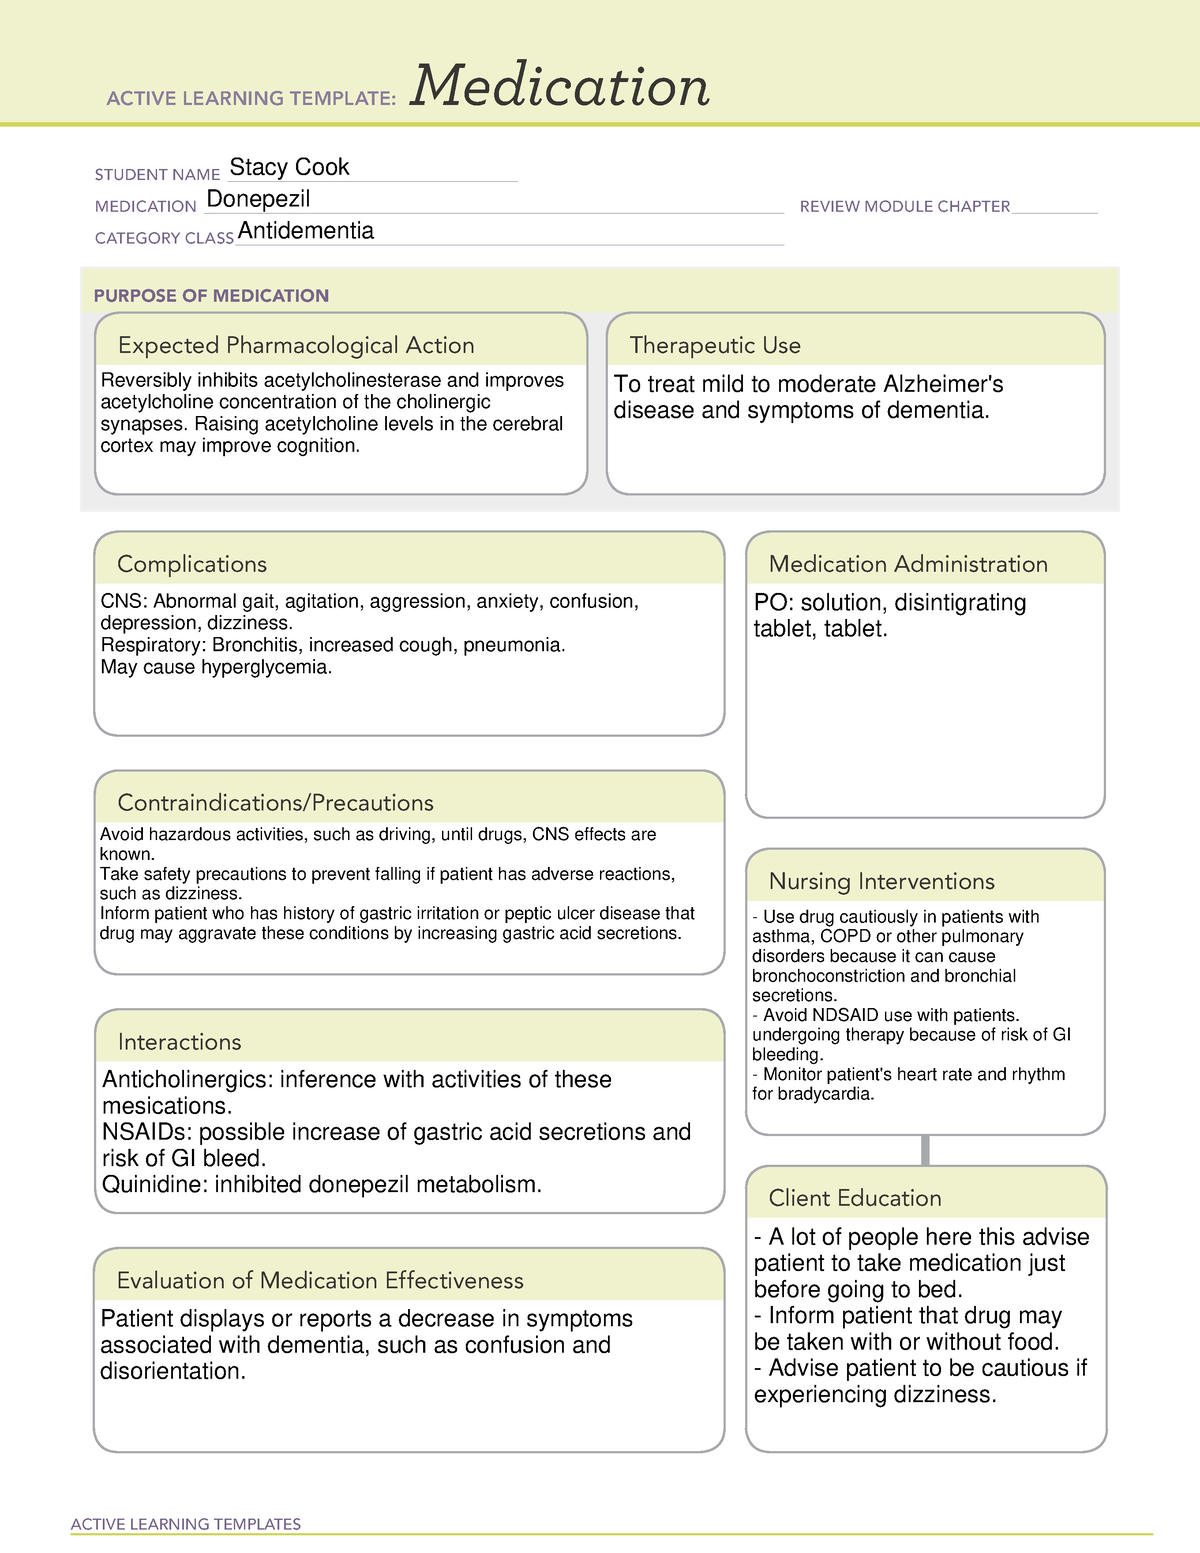 medication-template-donepezil-active-learning-templates-medication-student-name-studocu